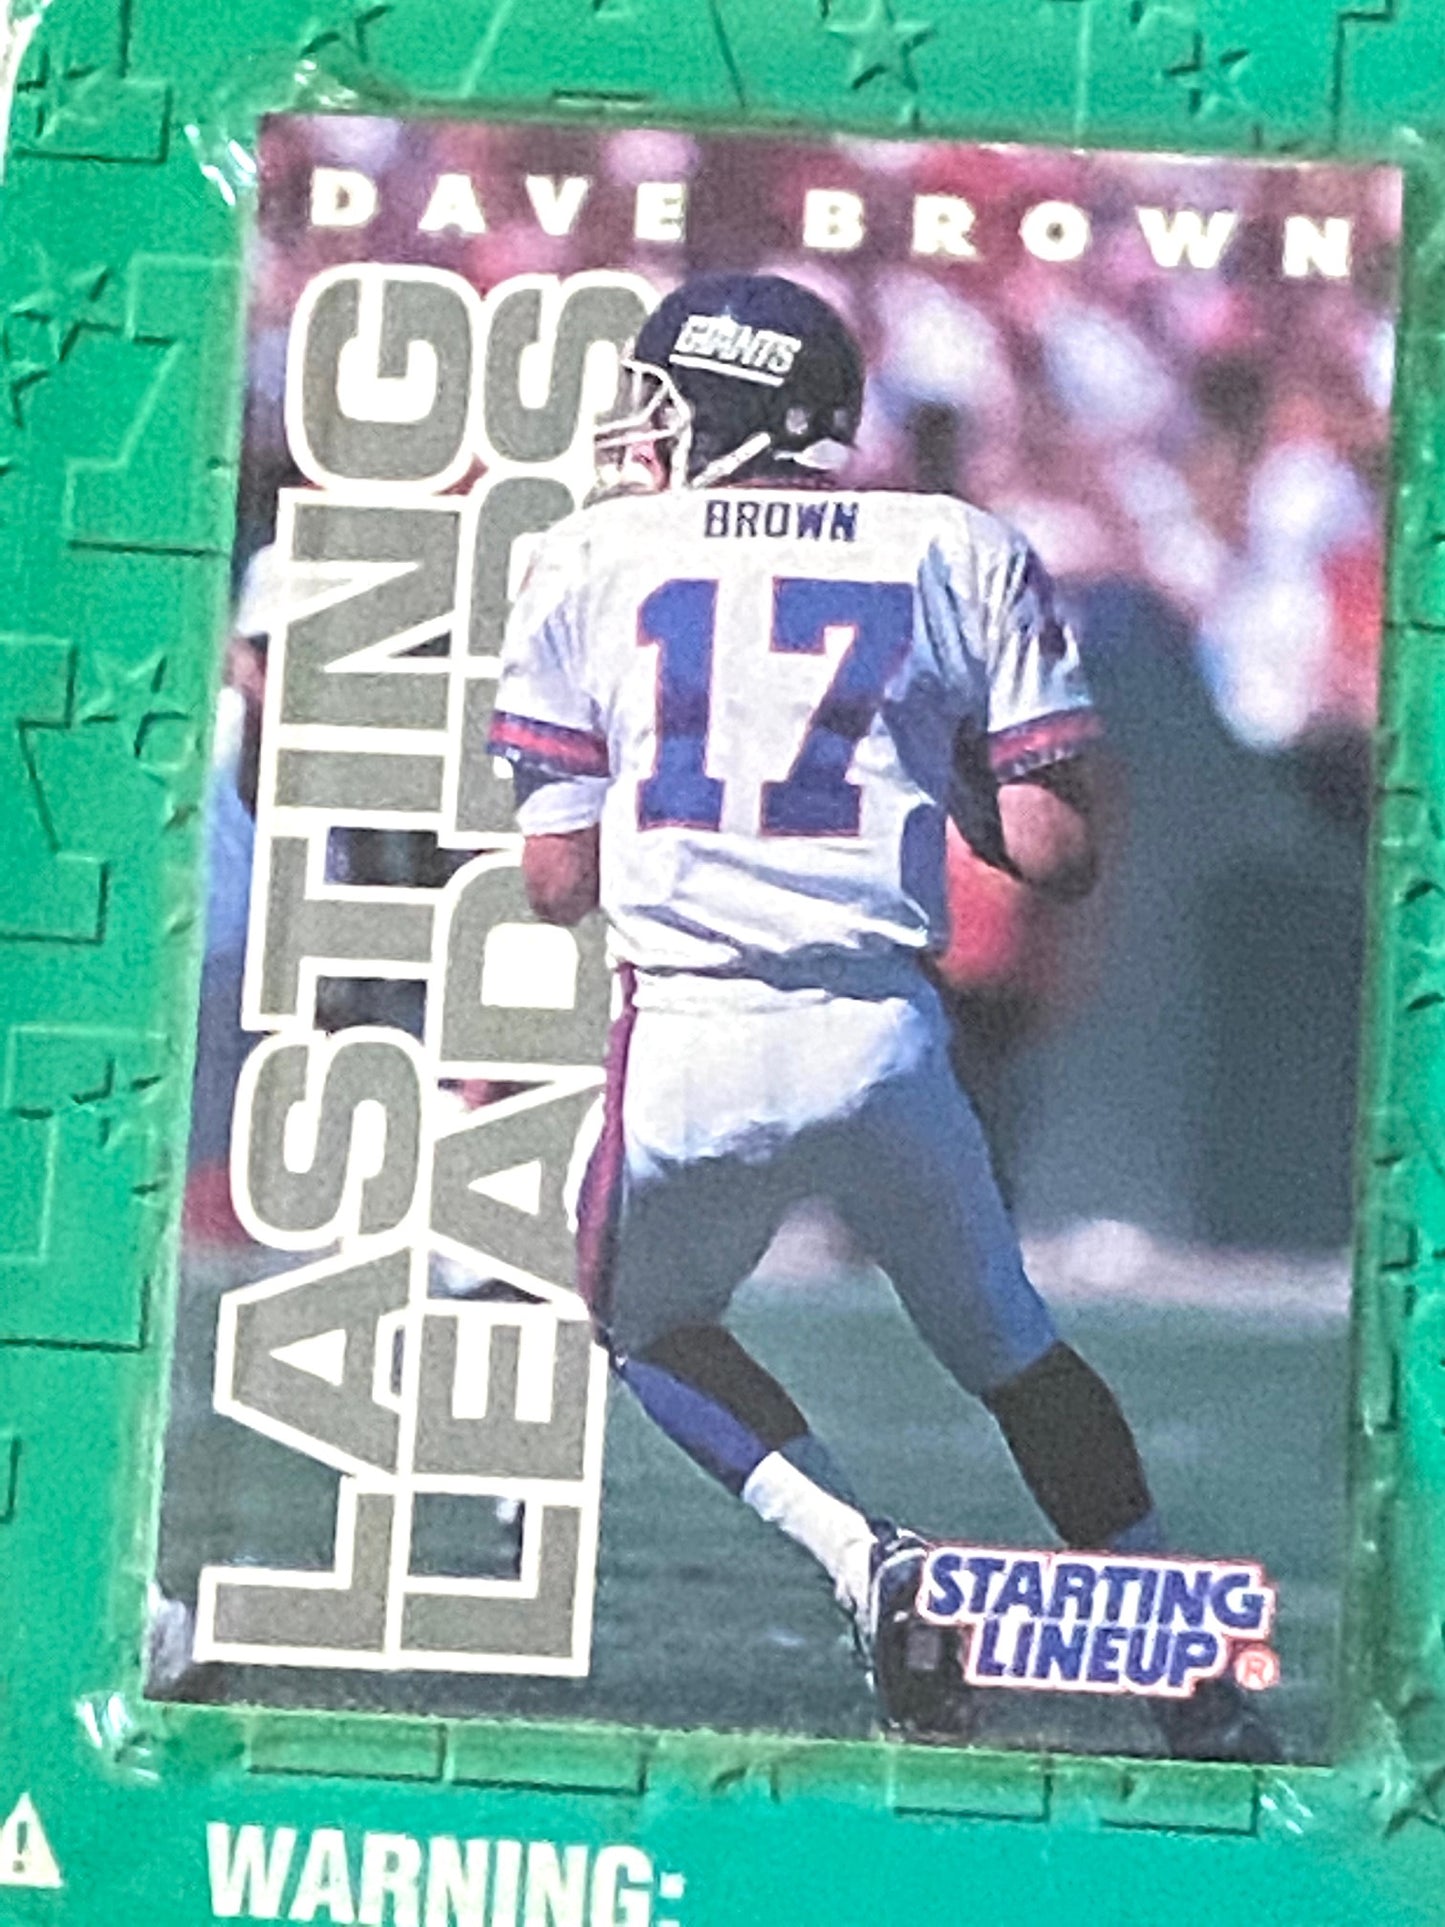 Dave Brown 1996 New York Giants NFL Starting Lineup Figurine by Kenner